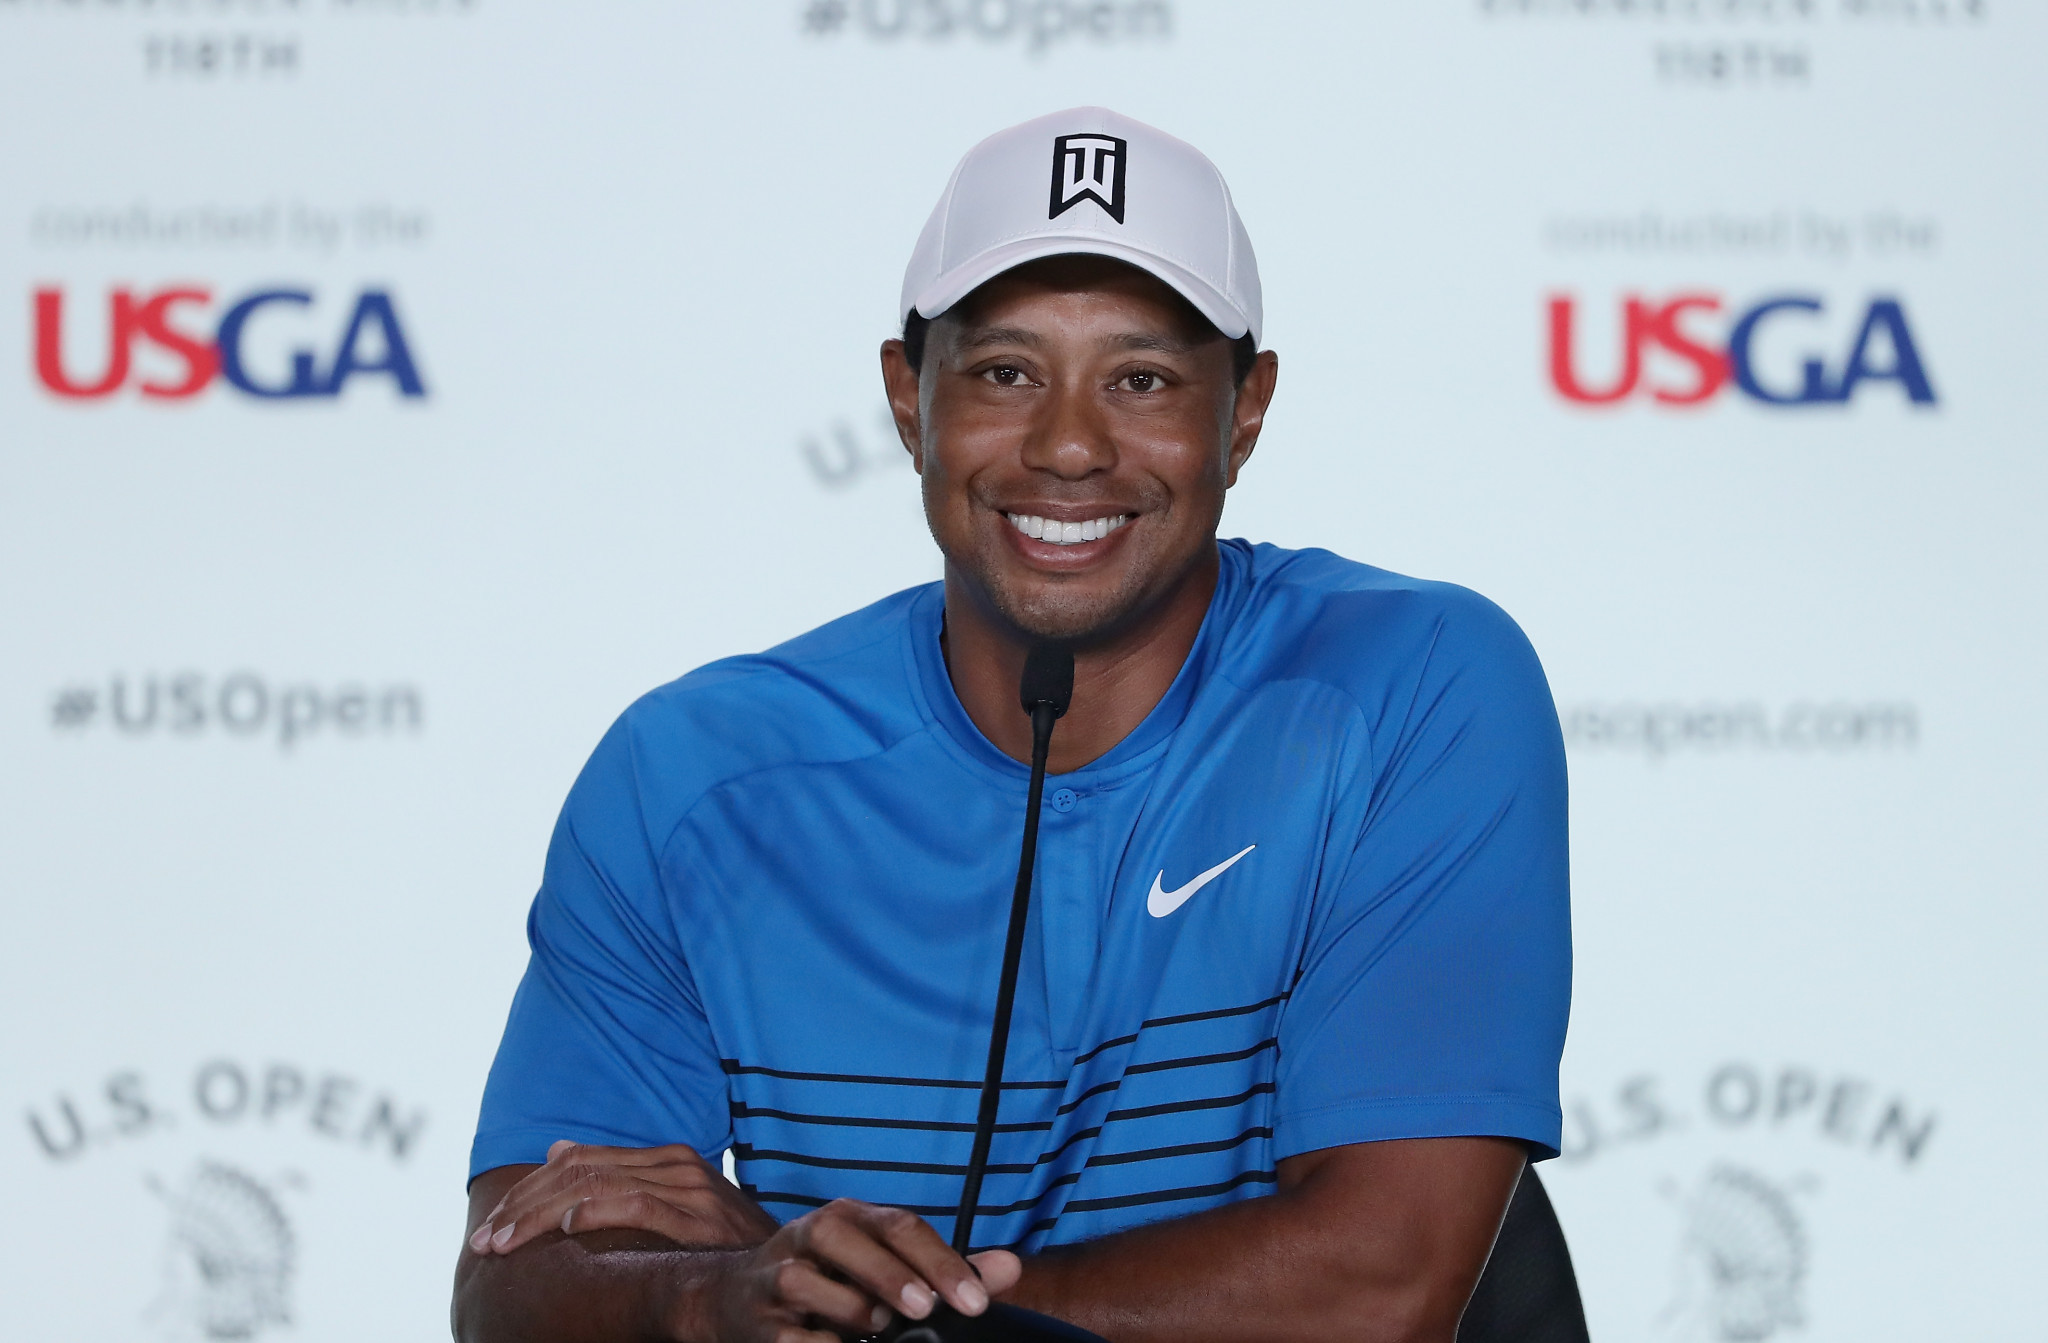 Tiger Woods says playing in US Open is a pure bonus after injury woes